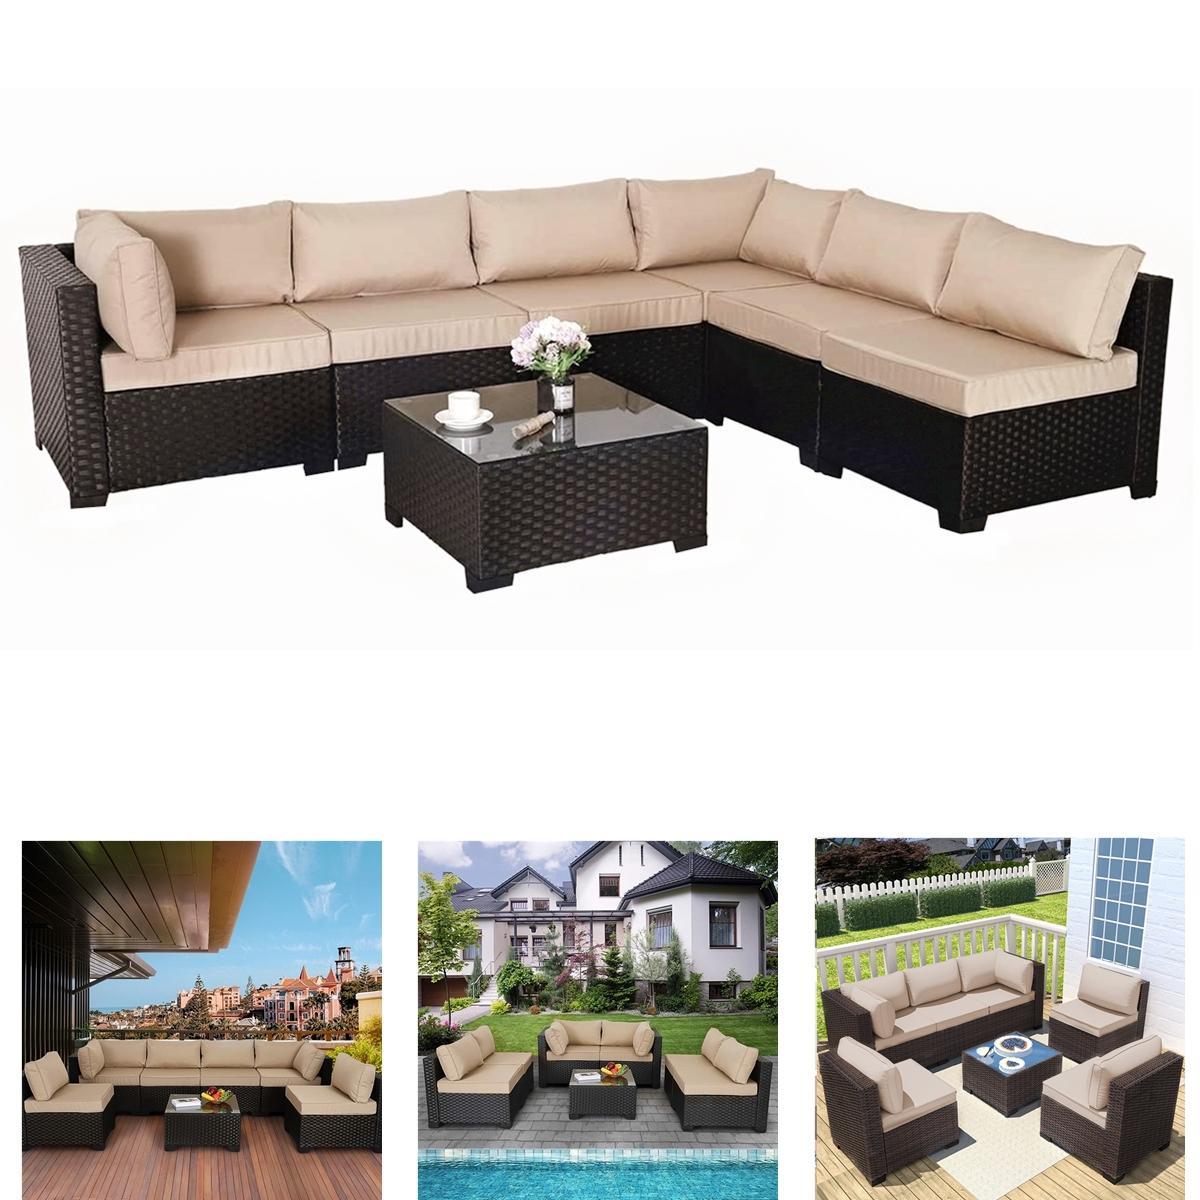 7 Piece Outdoor Furniture Garden Rattan Sofa Lounge Set Couch Wicker Patio Table Chairs Solid Steel